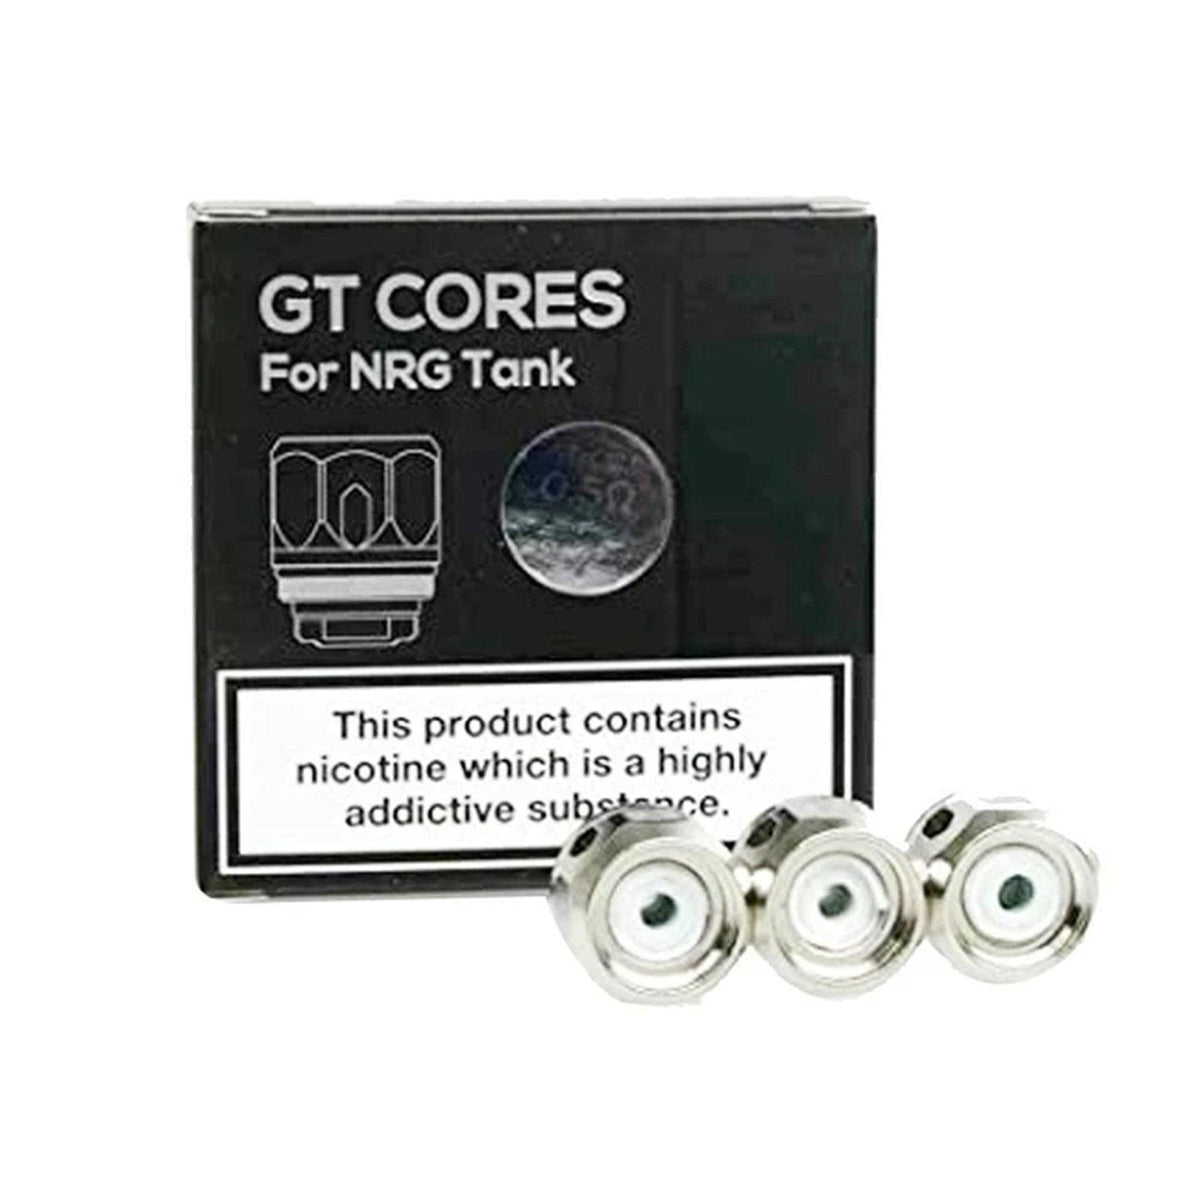 Vaporesso - GT Core - Replacement Coils - Pack of 3 - YD VAPE STORE